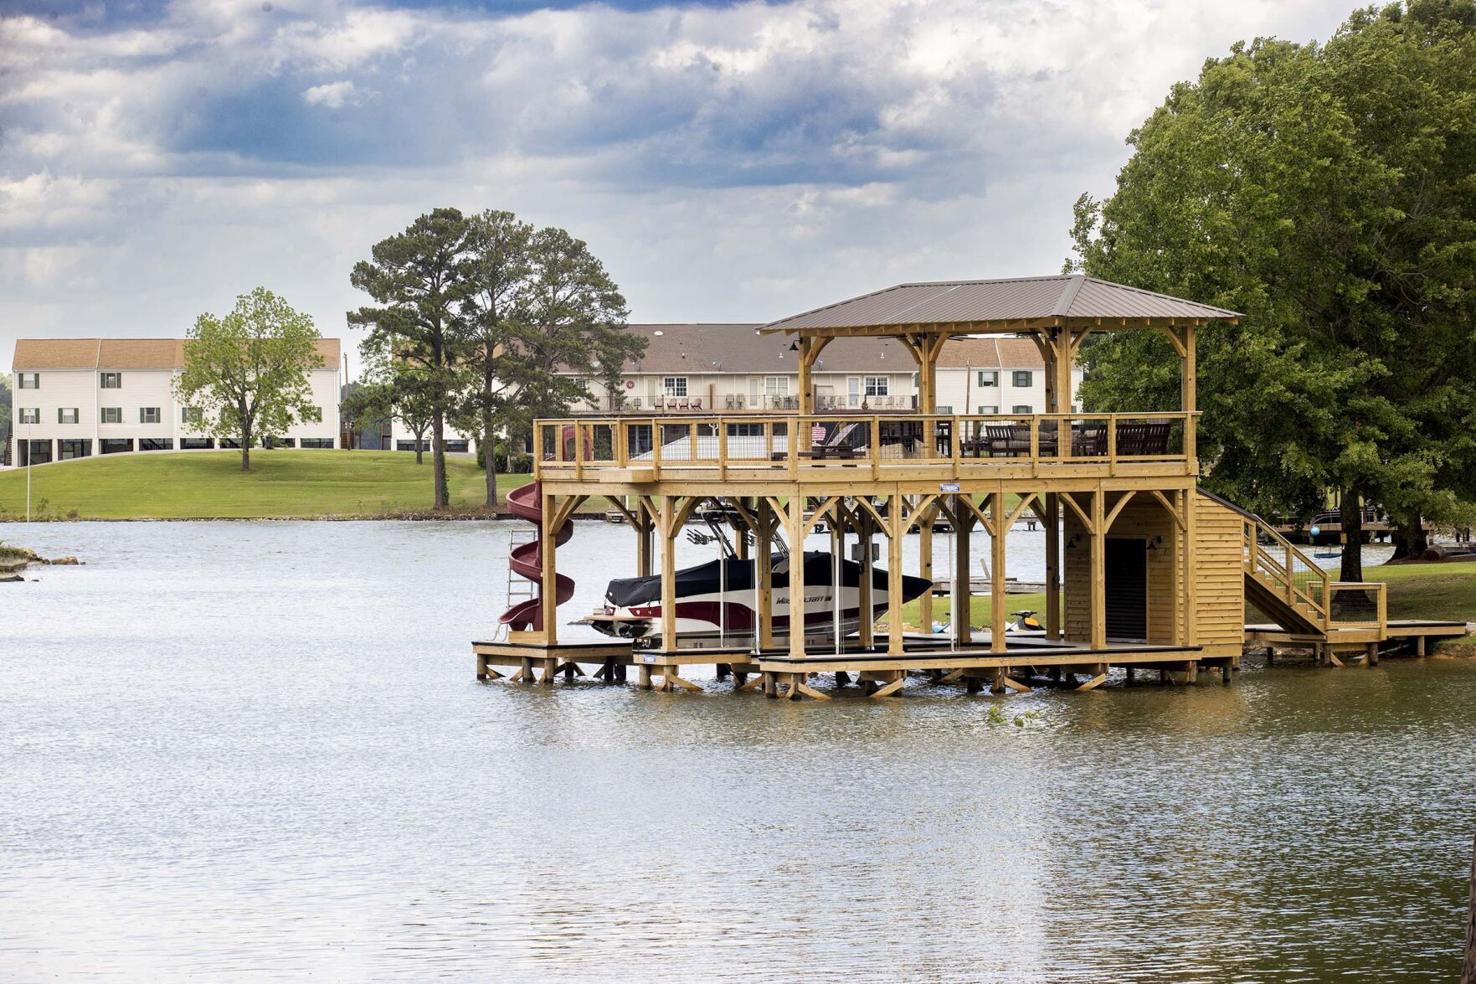 Logan Martin lake levels will reach summer pool on Monday, will have